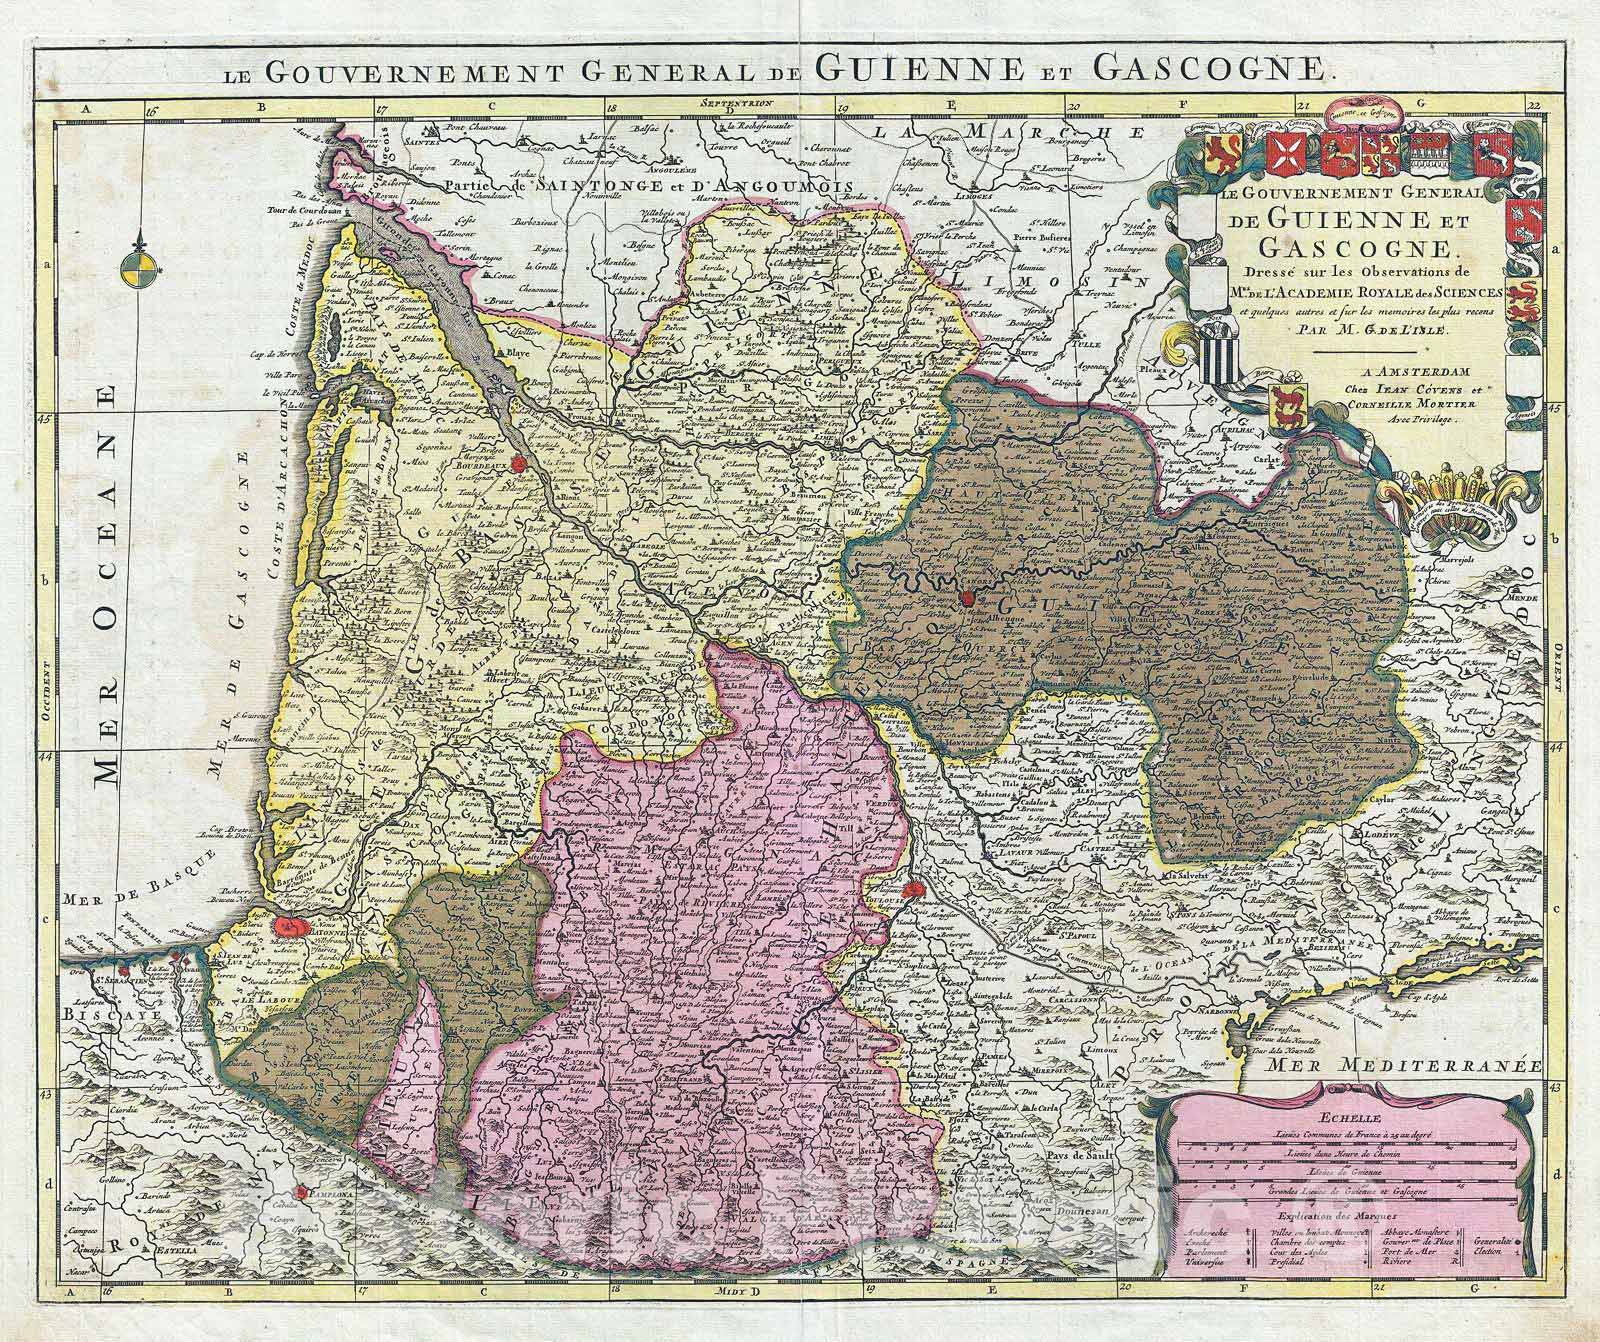 Historic Map : Covens and Mortier Map of The Bordeaux Wine Region (Gironde, Gascogne, Guienne), 1742, Vintage Wall Art